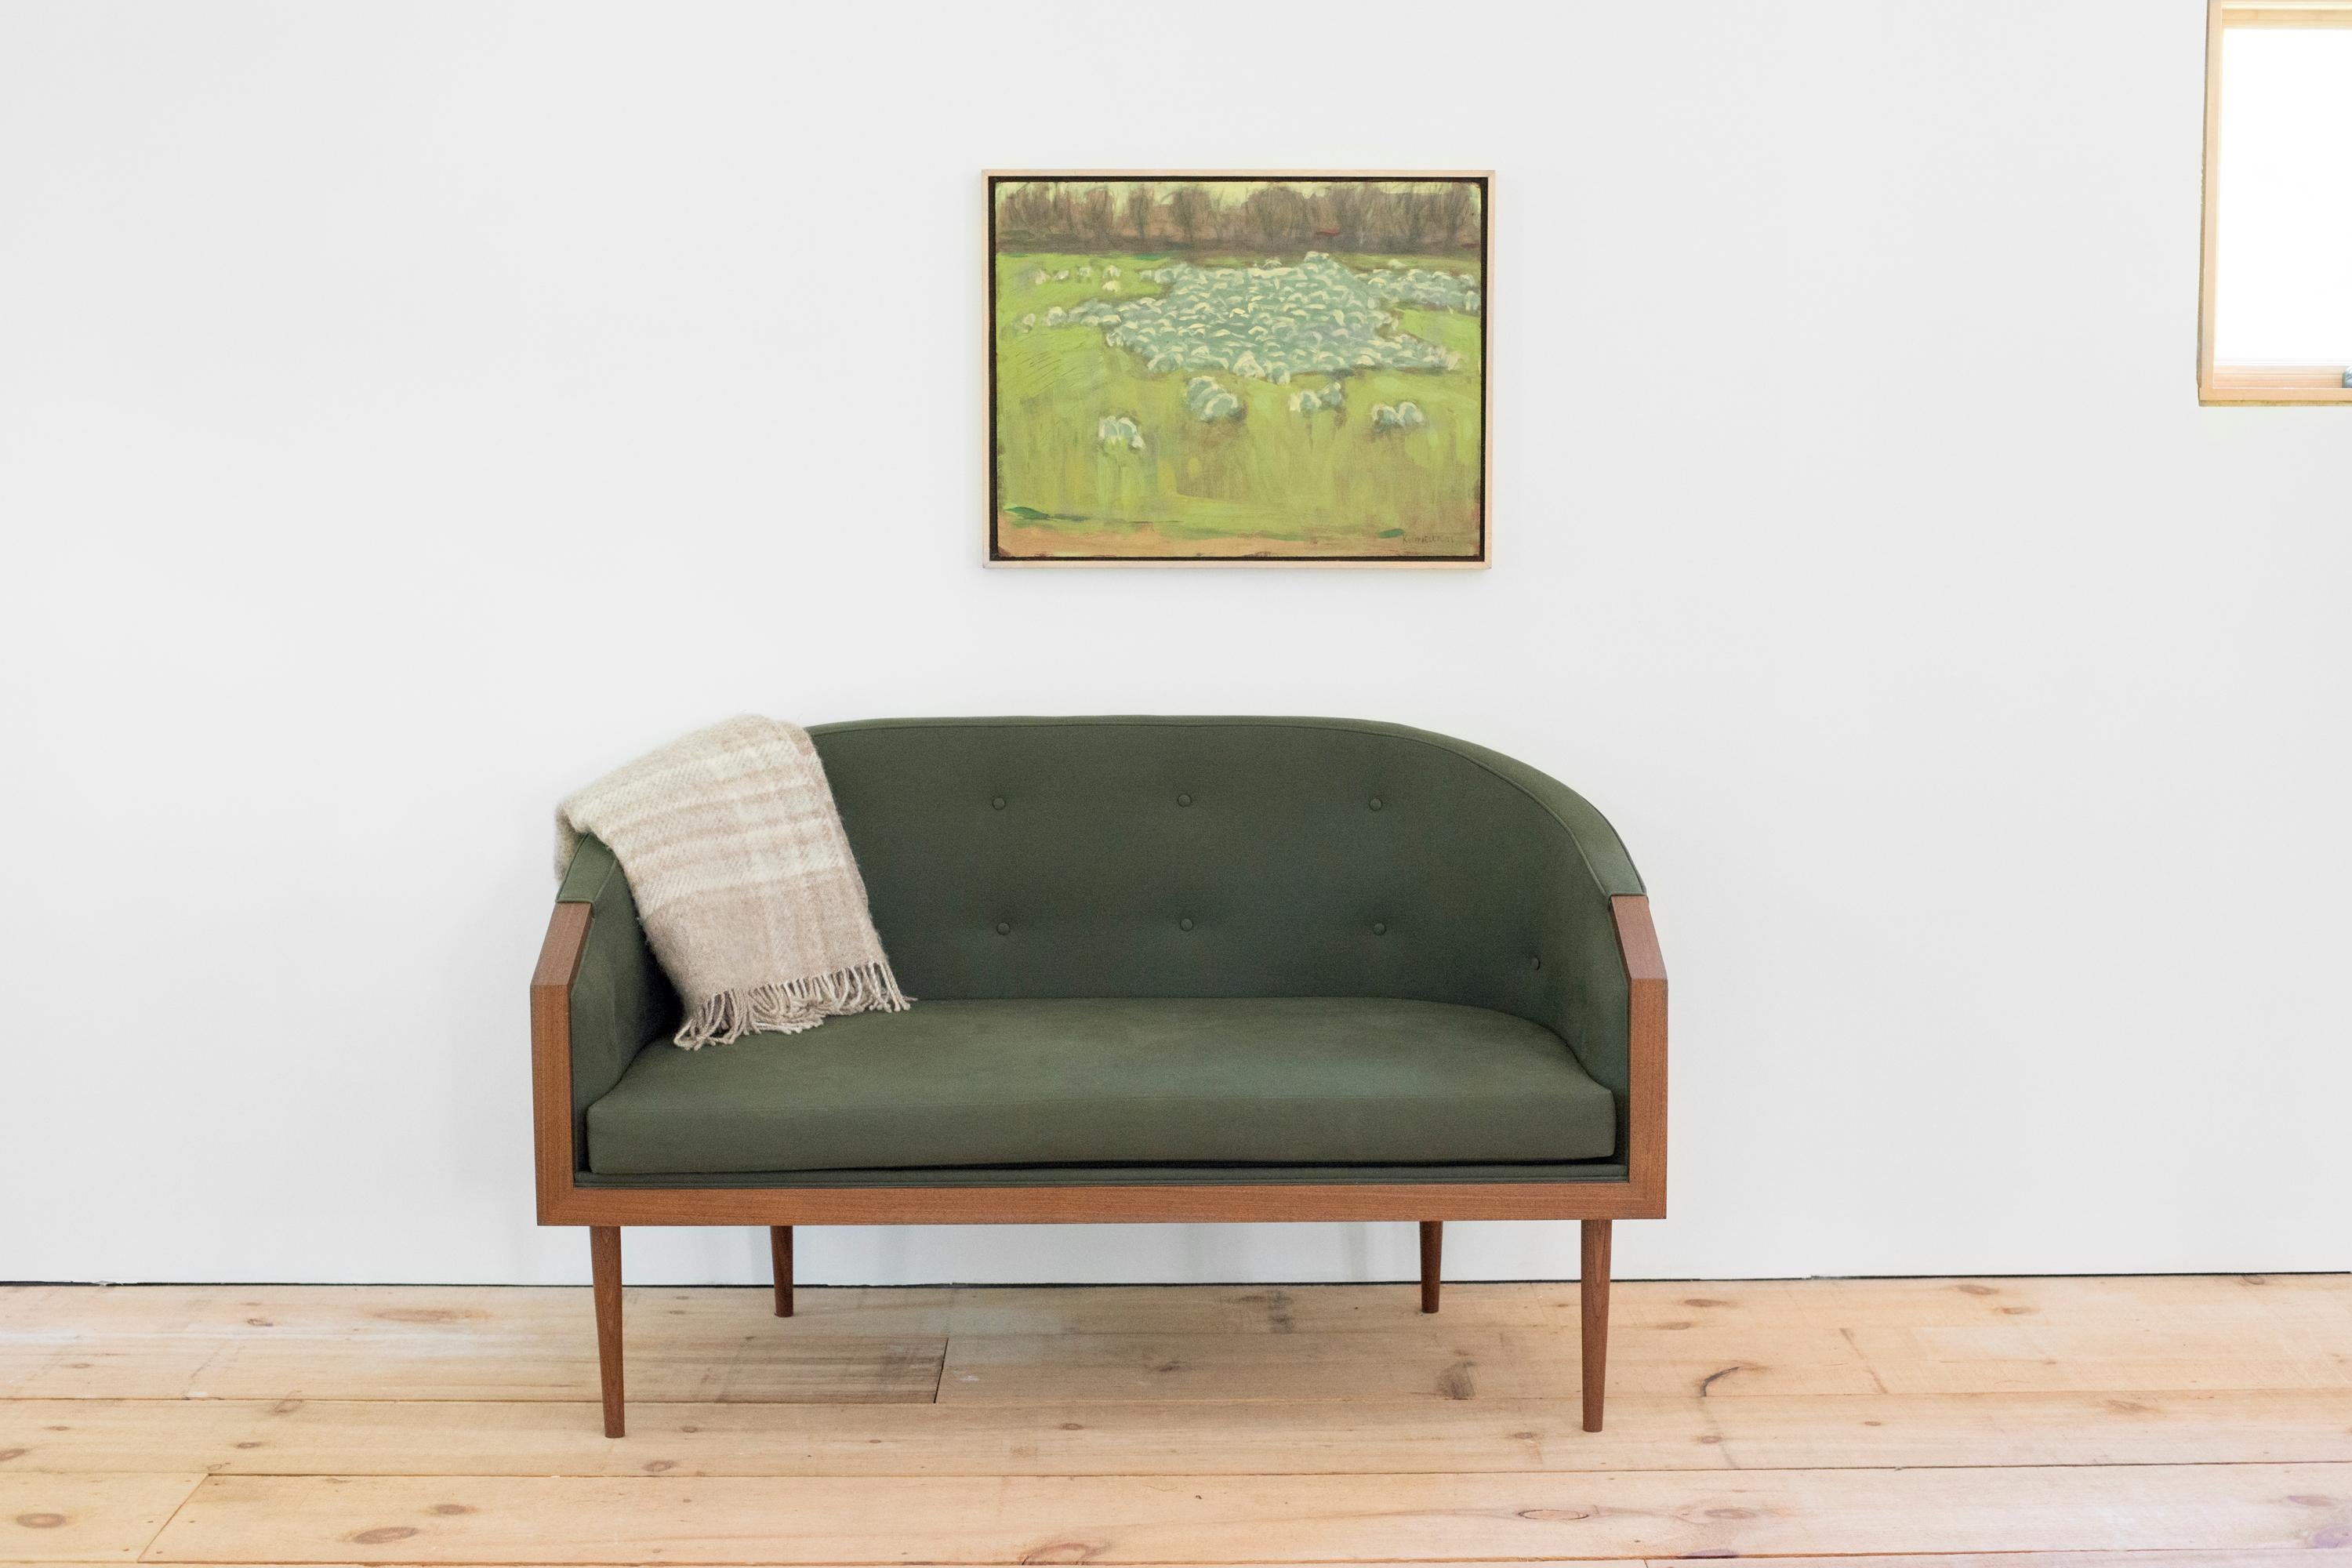 A new iteration which echoes that of our chairs of the same name, the loveseat, shown here in walnut with green cotton upholstery and two rows of button tufting, uses an elongated barrel form to cradle the body. Four hand-turned and tapered legs